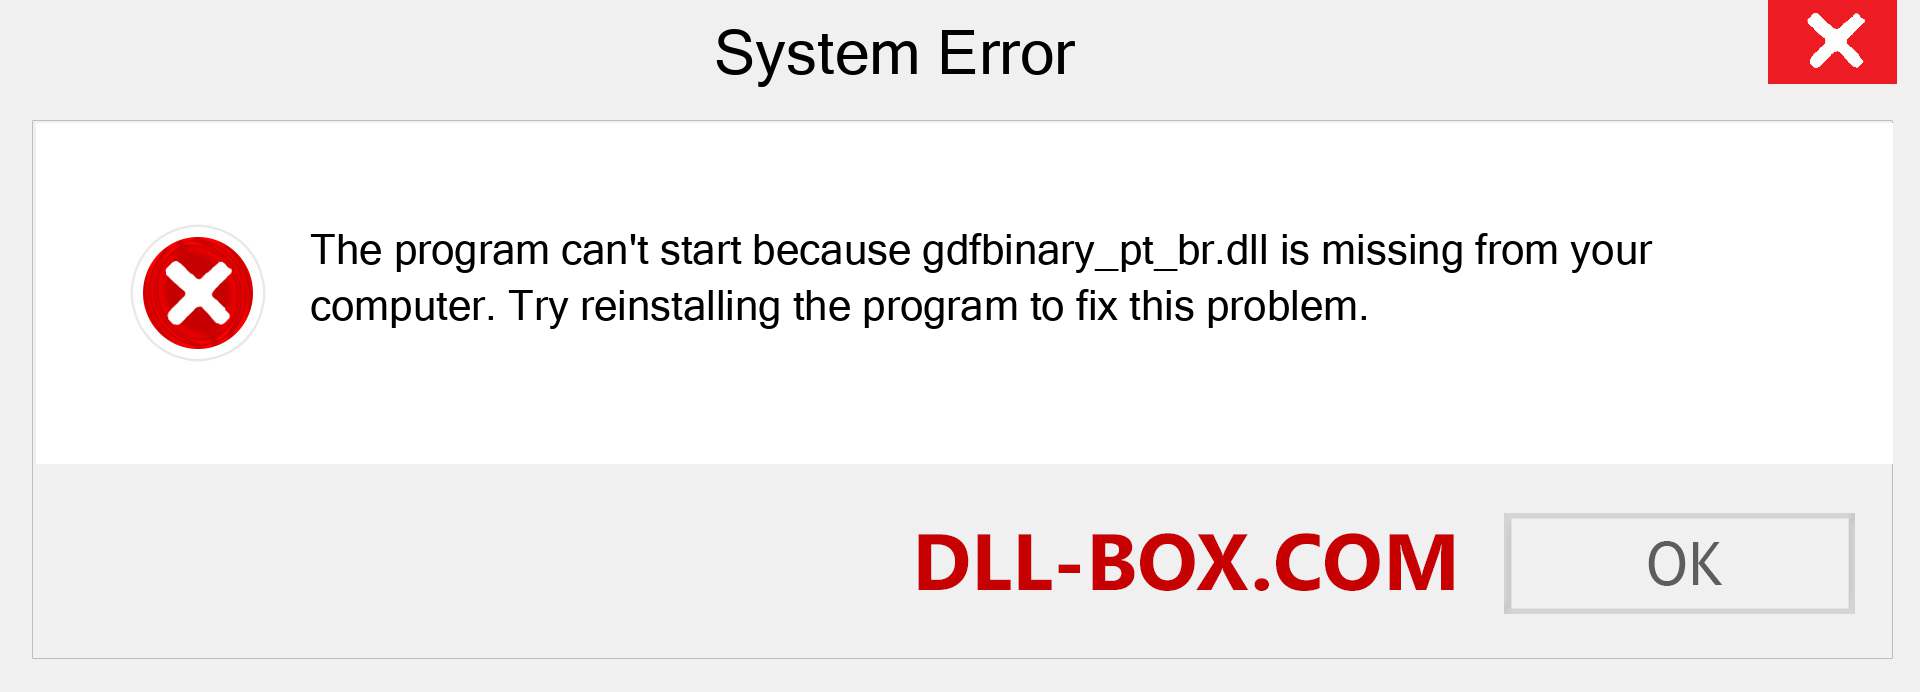  gdfbinary_pt_br.dll file is missing?. Download for Windows 7, 8, 10 - Fix  gdfbinary_pt_br dll Missing Error on Windows, photos, images